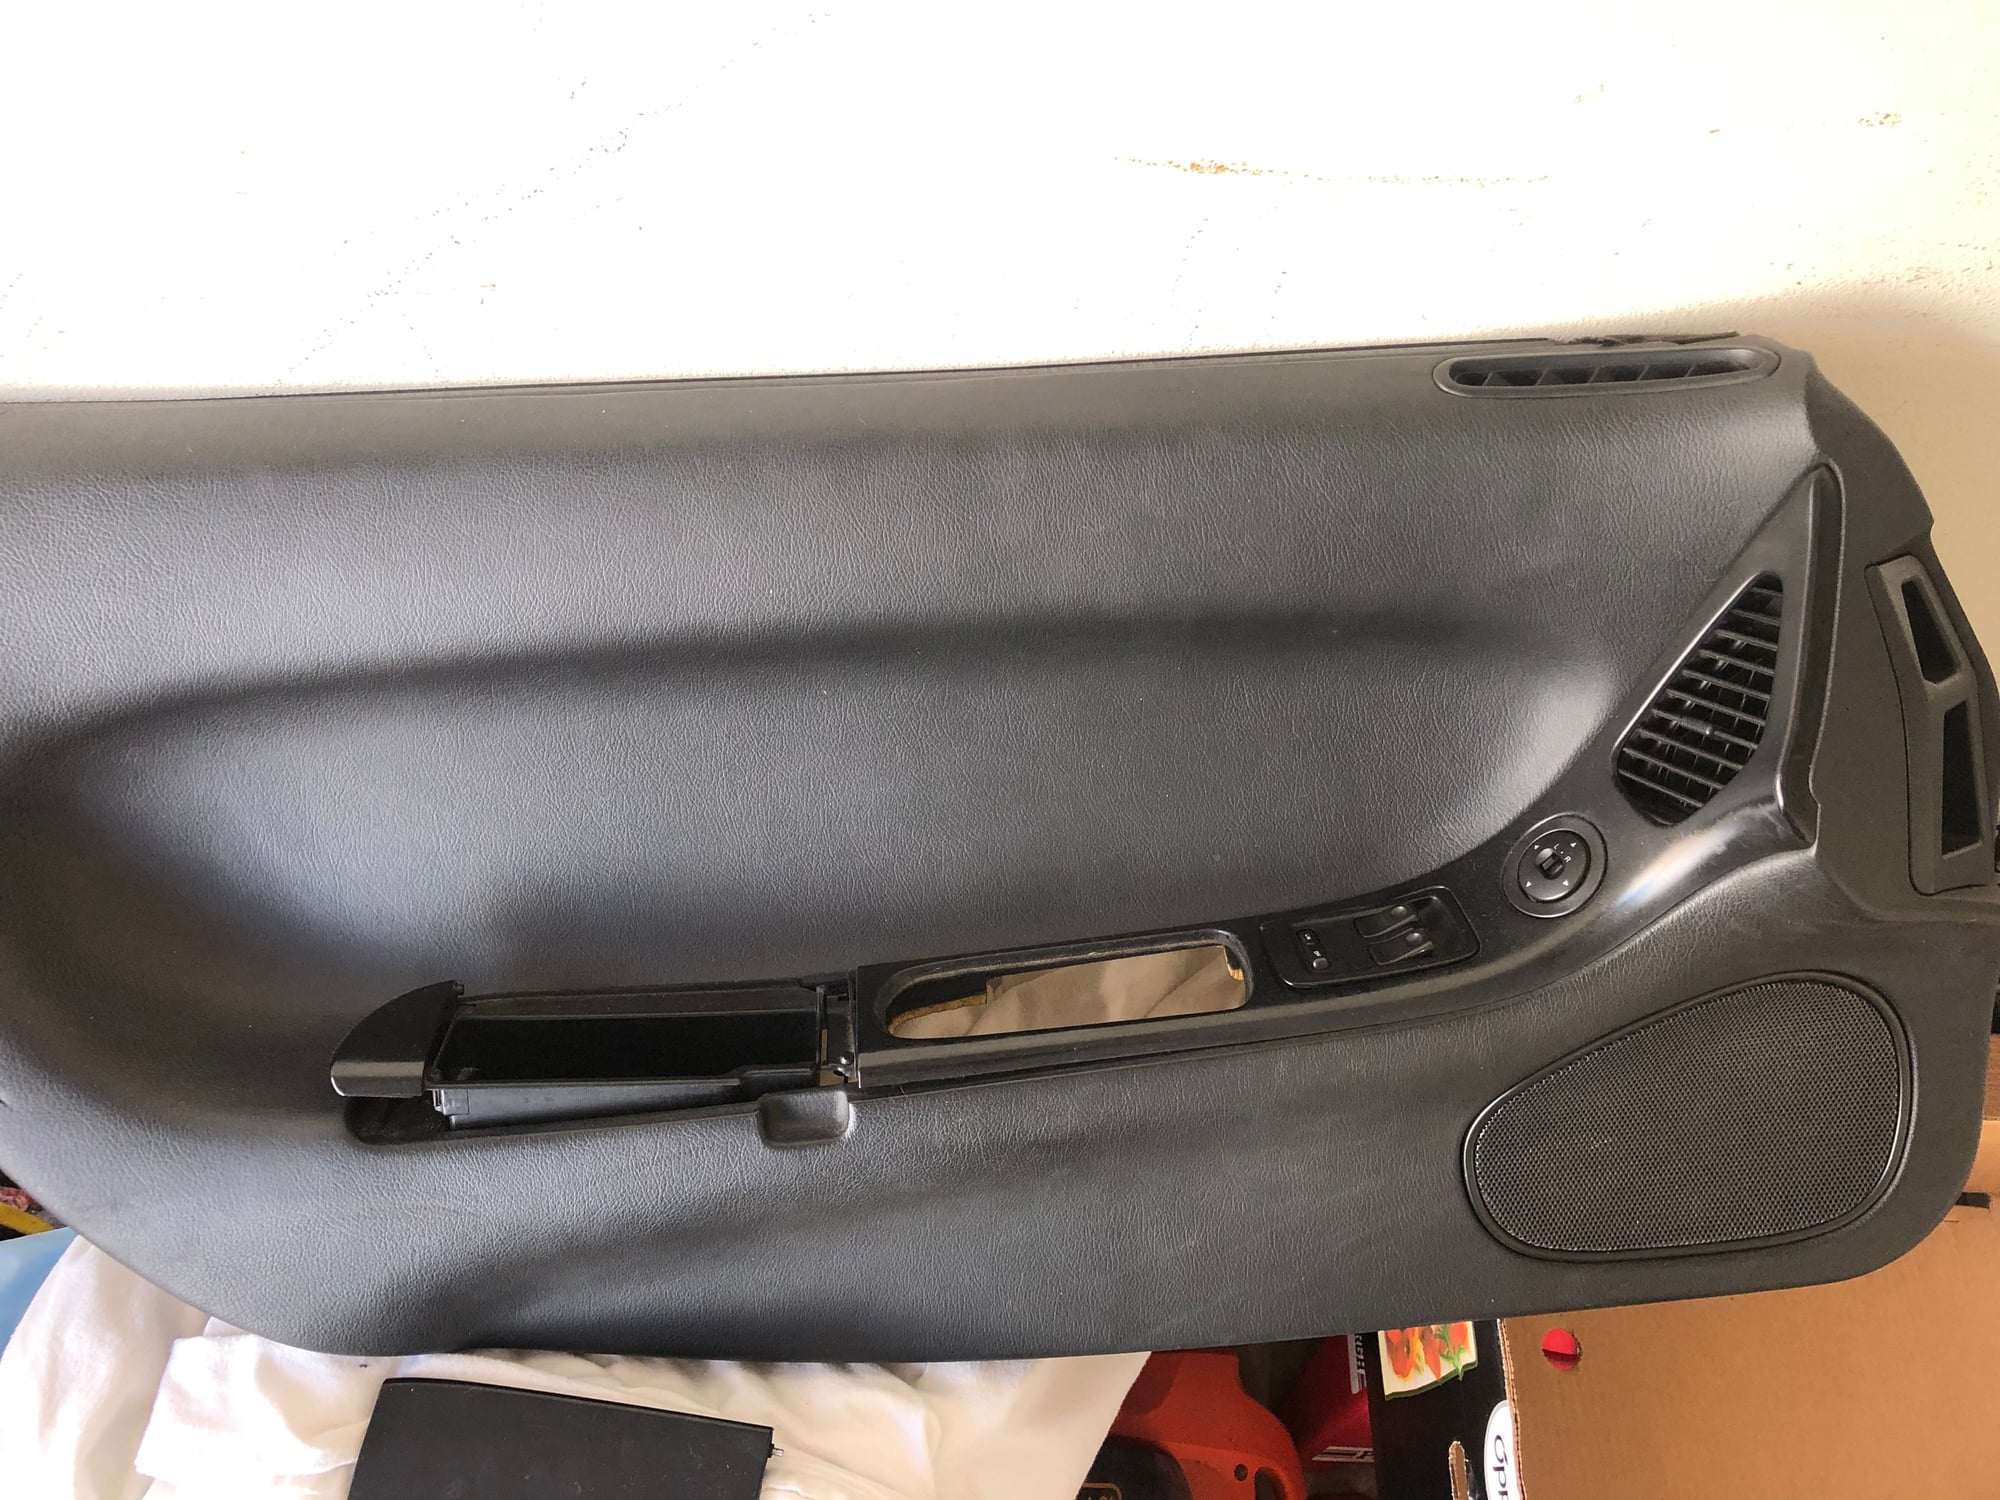 Miscellaneous - Misc Body and Interior Parts - Used - 1993 to 1995 Mazda RX-7 - San Diego, CA 92109, United States